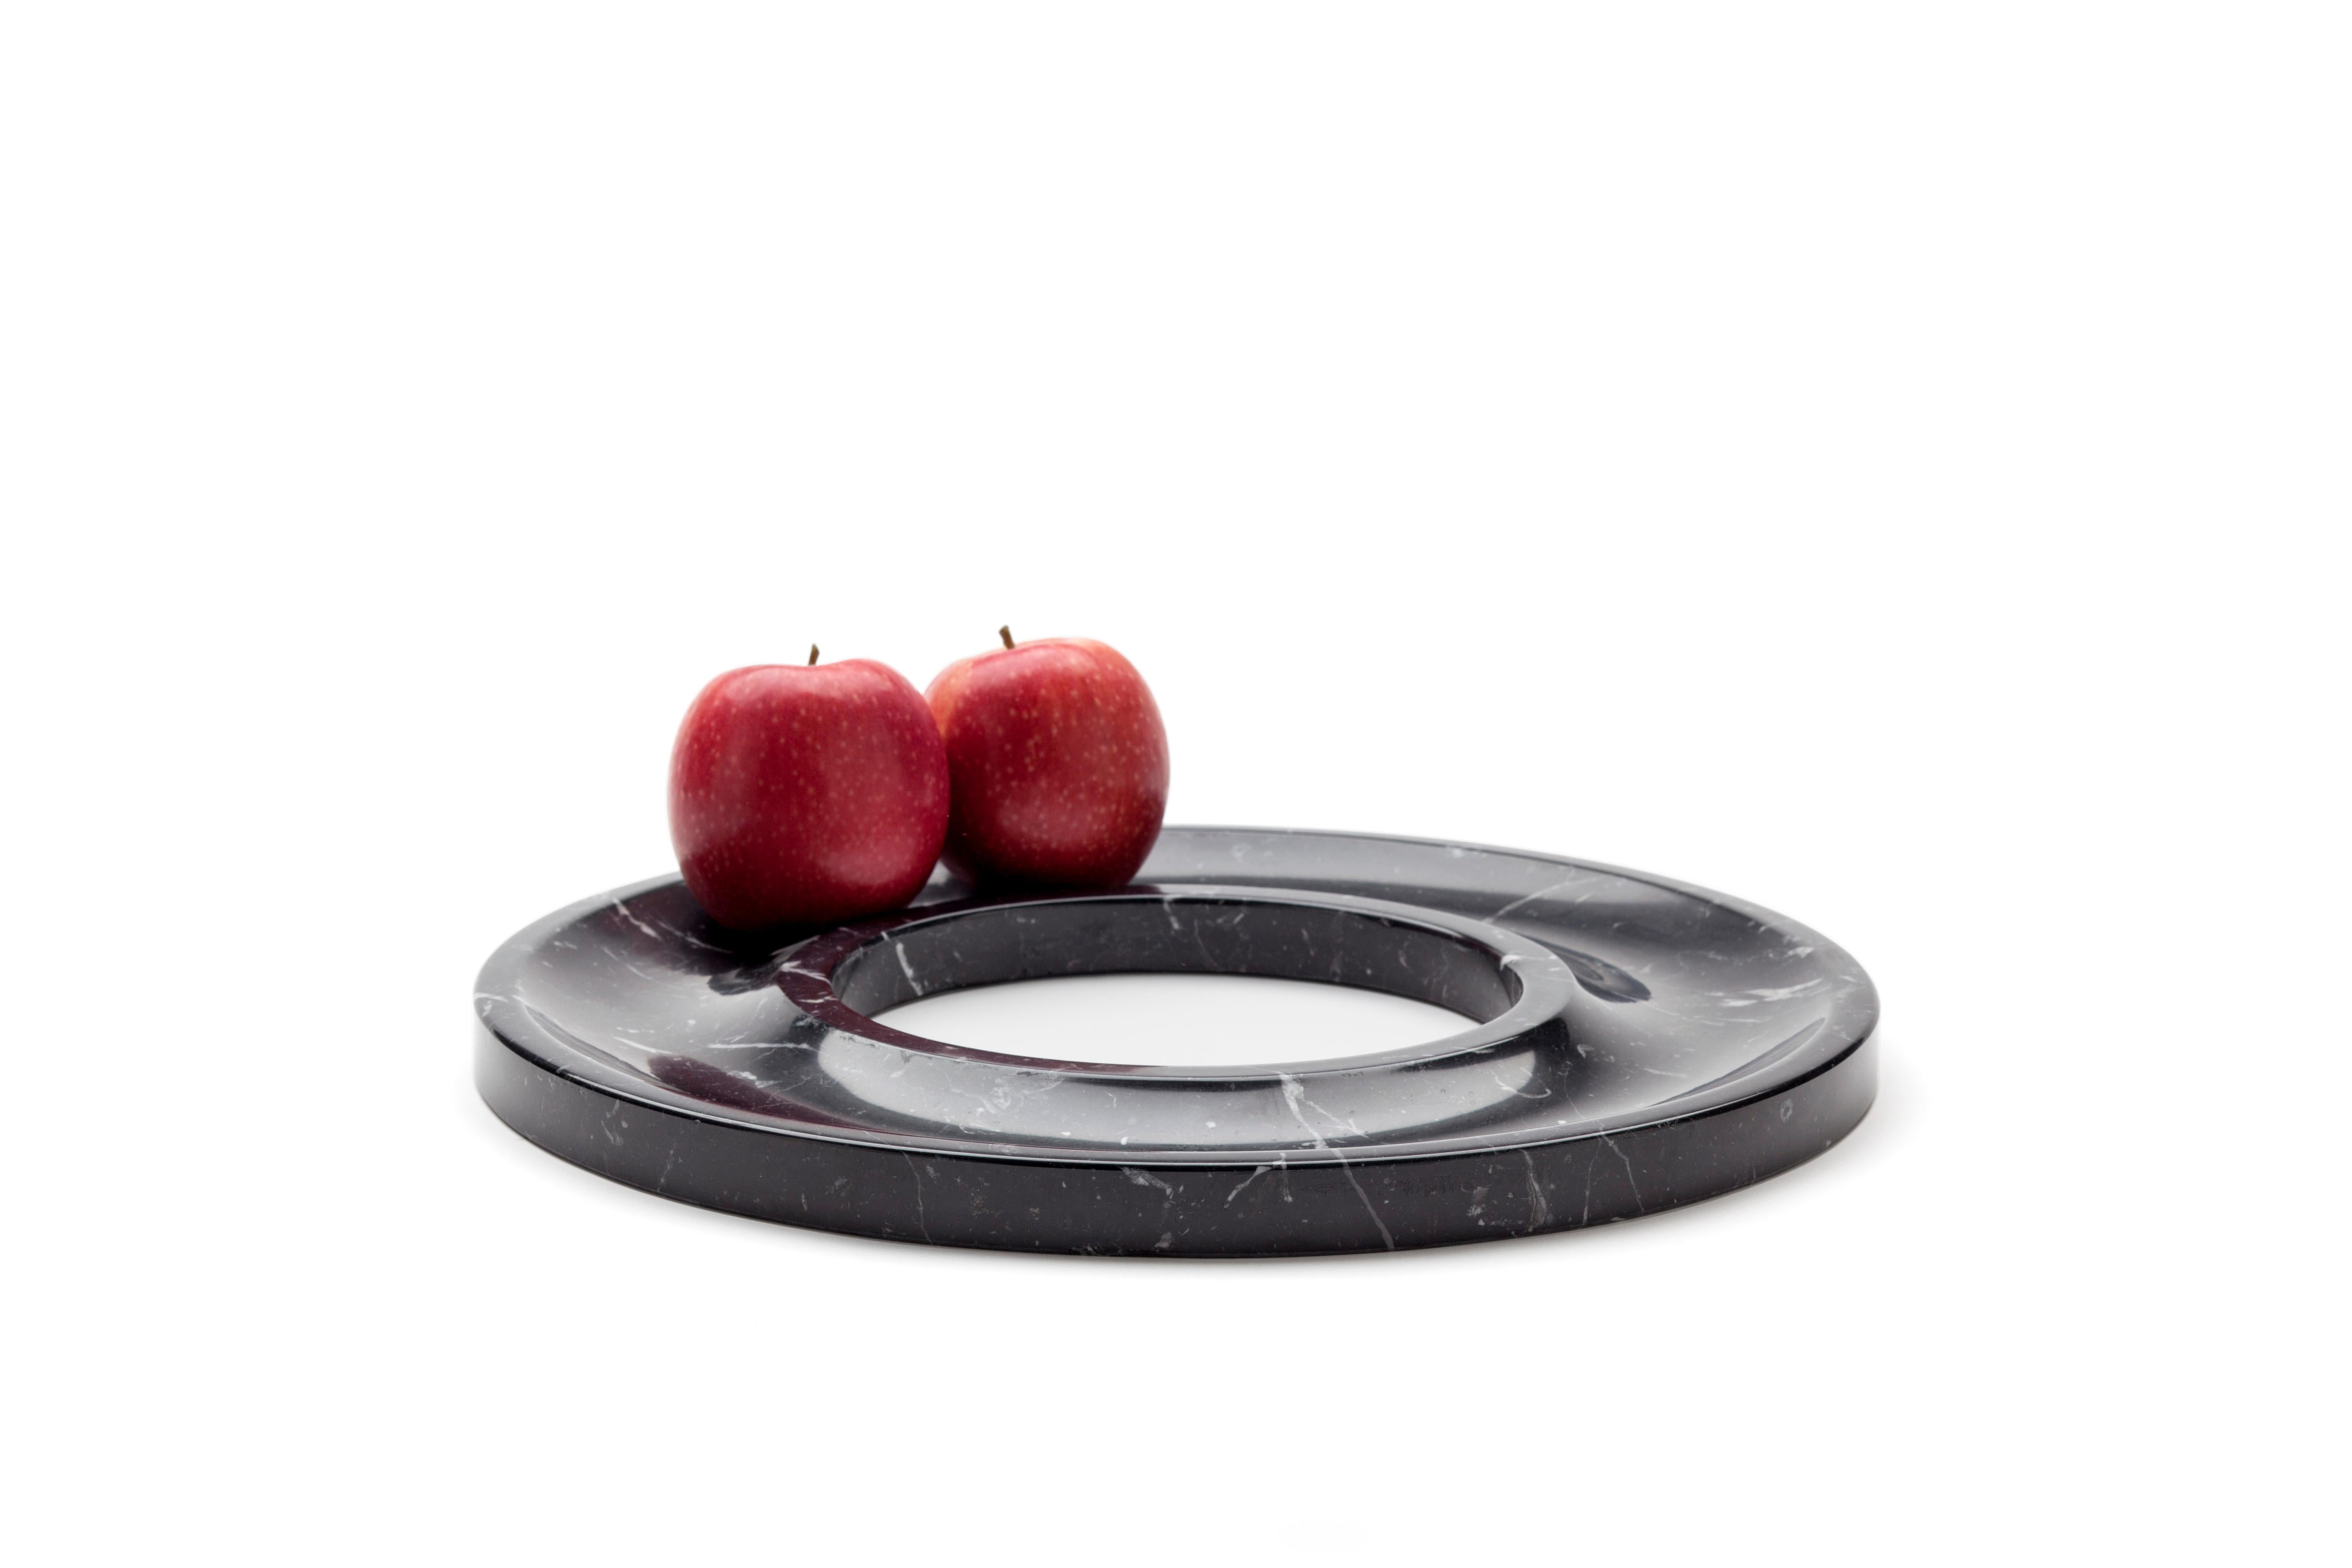 Marble ring tray by Joseph Vila Capdevila
Material: Marquina marble
Dimensions: ø 35 x 3 cm
Weight: 2.5 kg

Aparentment is a space for creation and innovation, experimenting with materials with the goal to develop robust, lasting and timeless